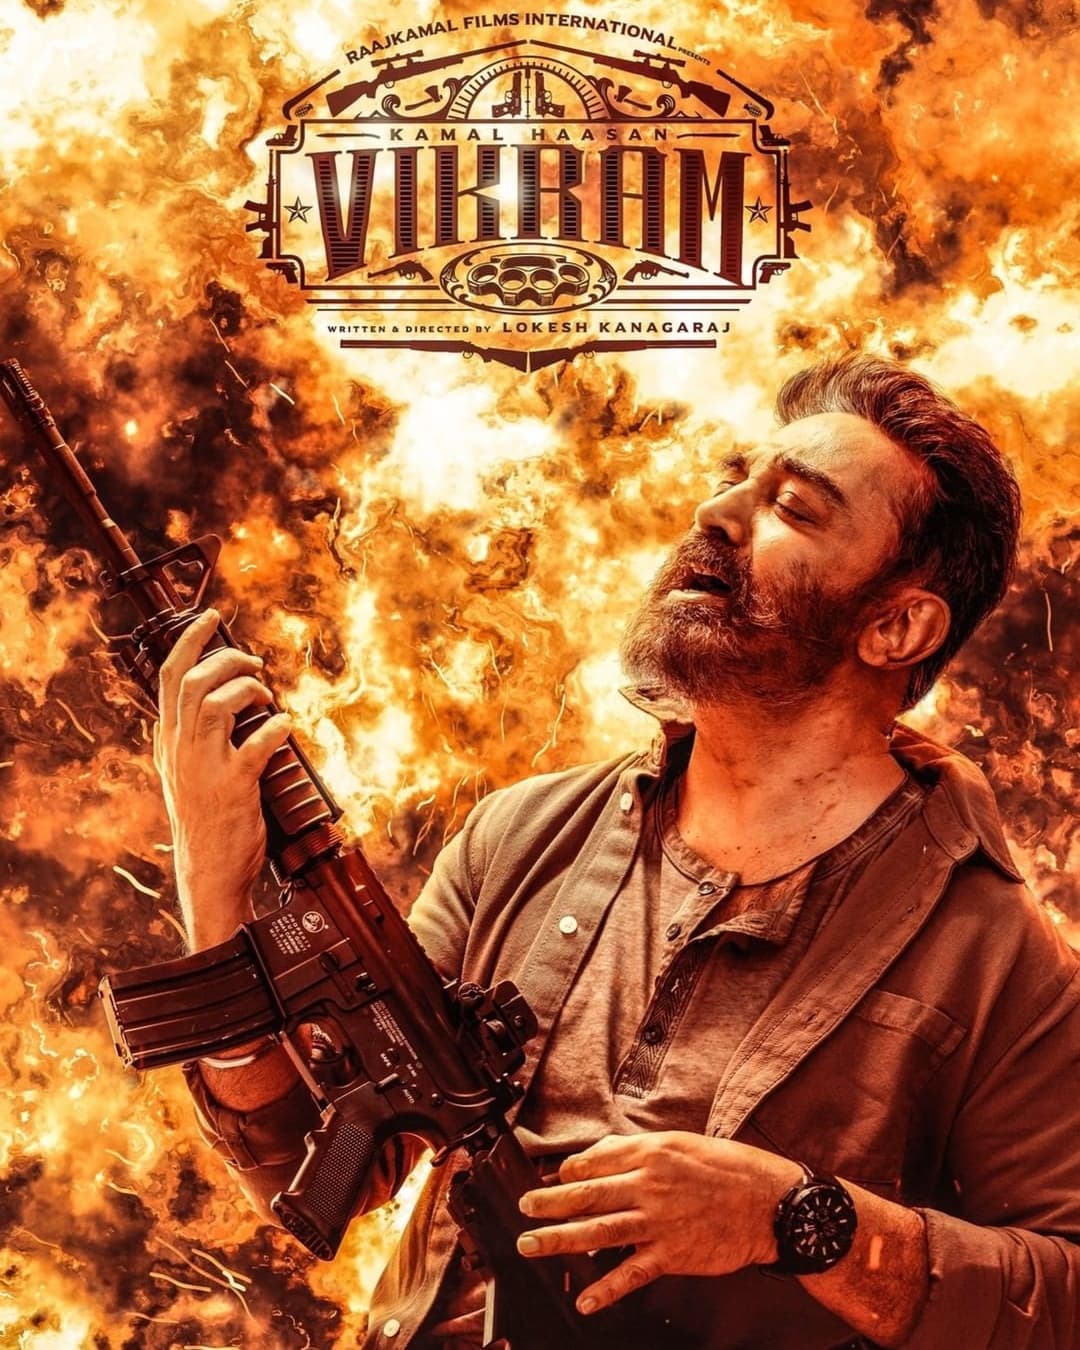 KamalHassan has dubbed in his own voice in 3 languages for Vikram